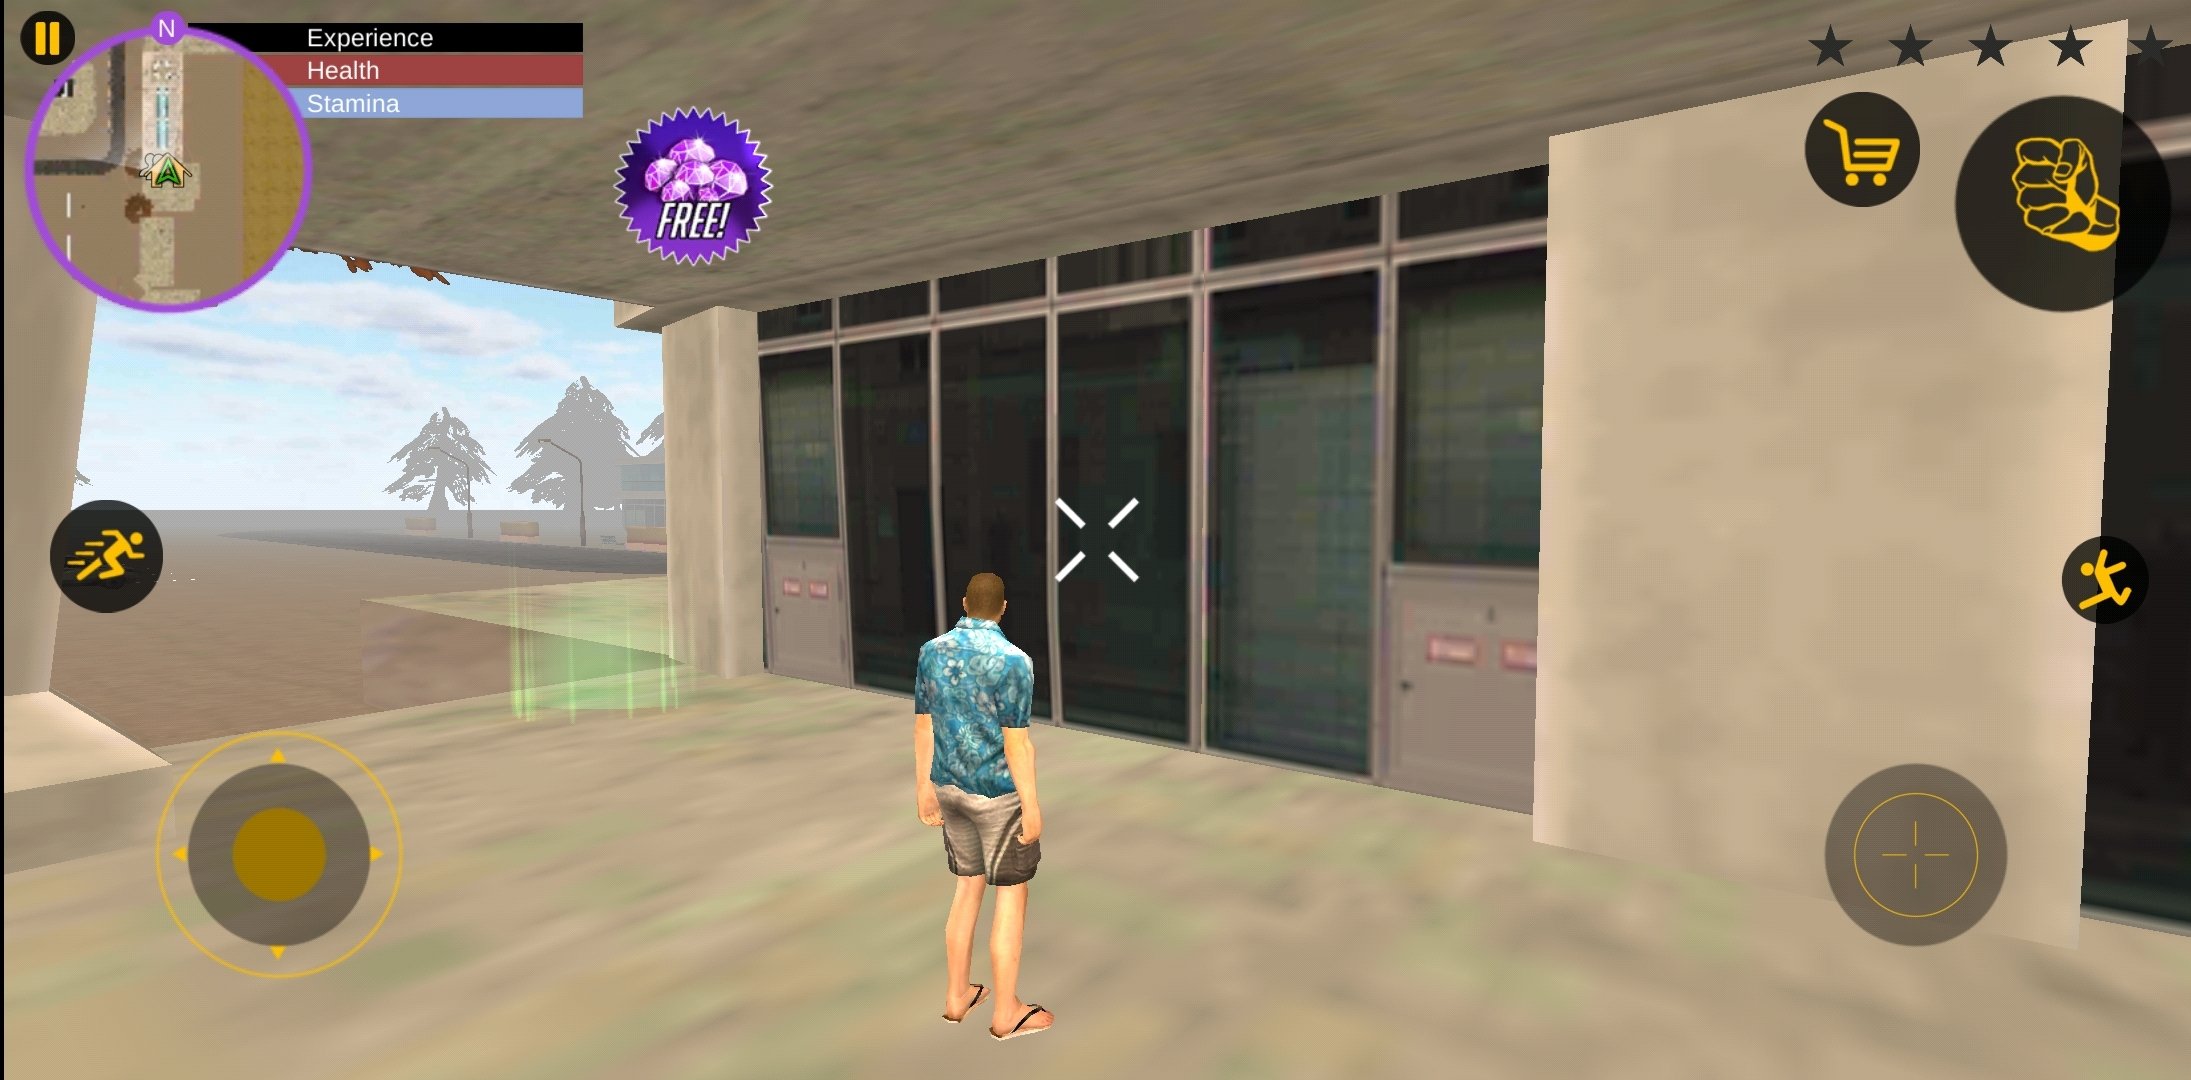 gta gangster free download for mobile